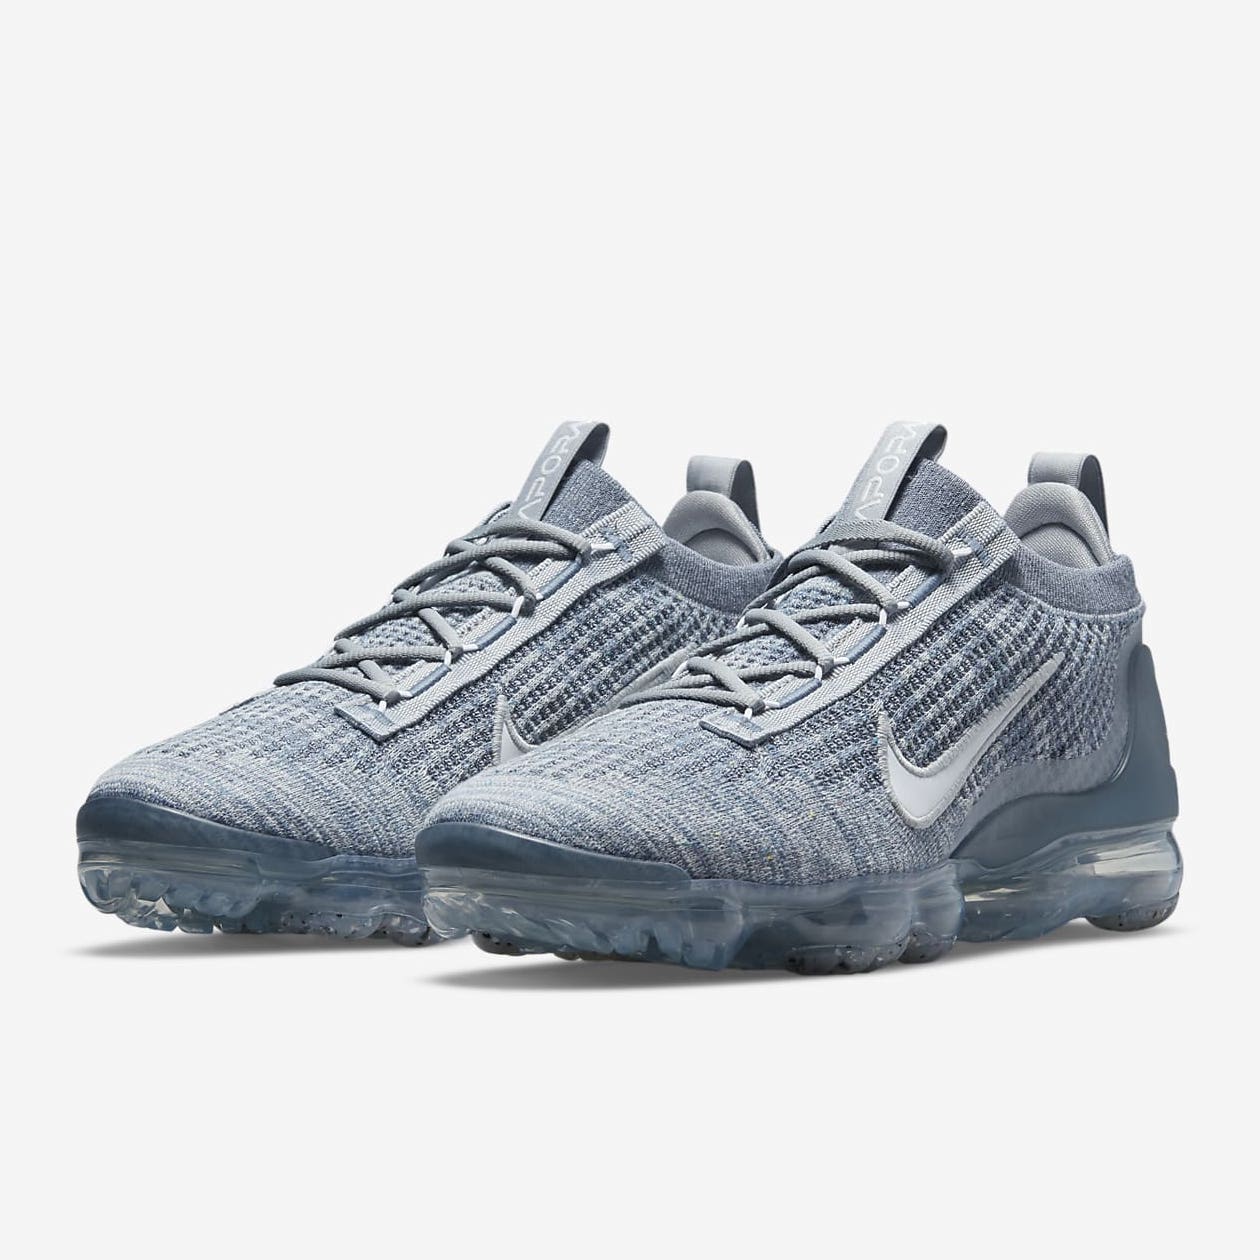 Nike Air VaporMax 2021 sneakers: Price in Malaysia & where to buy